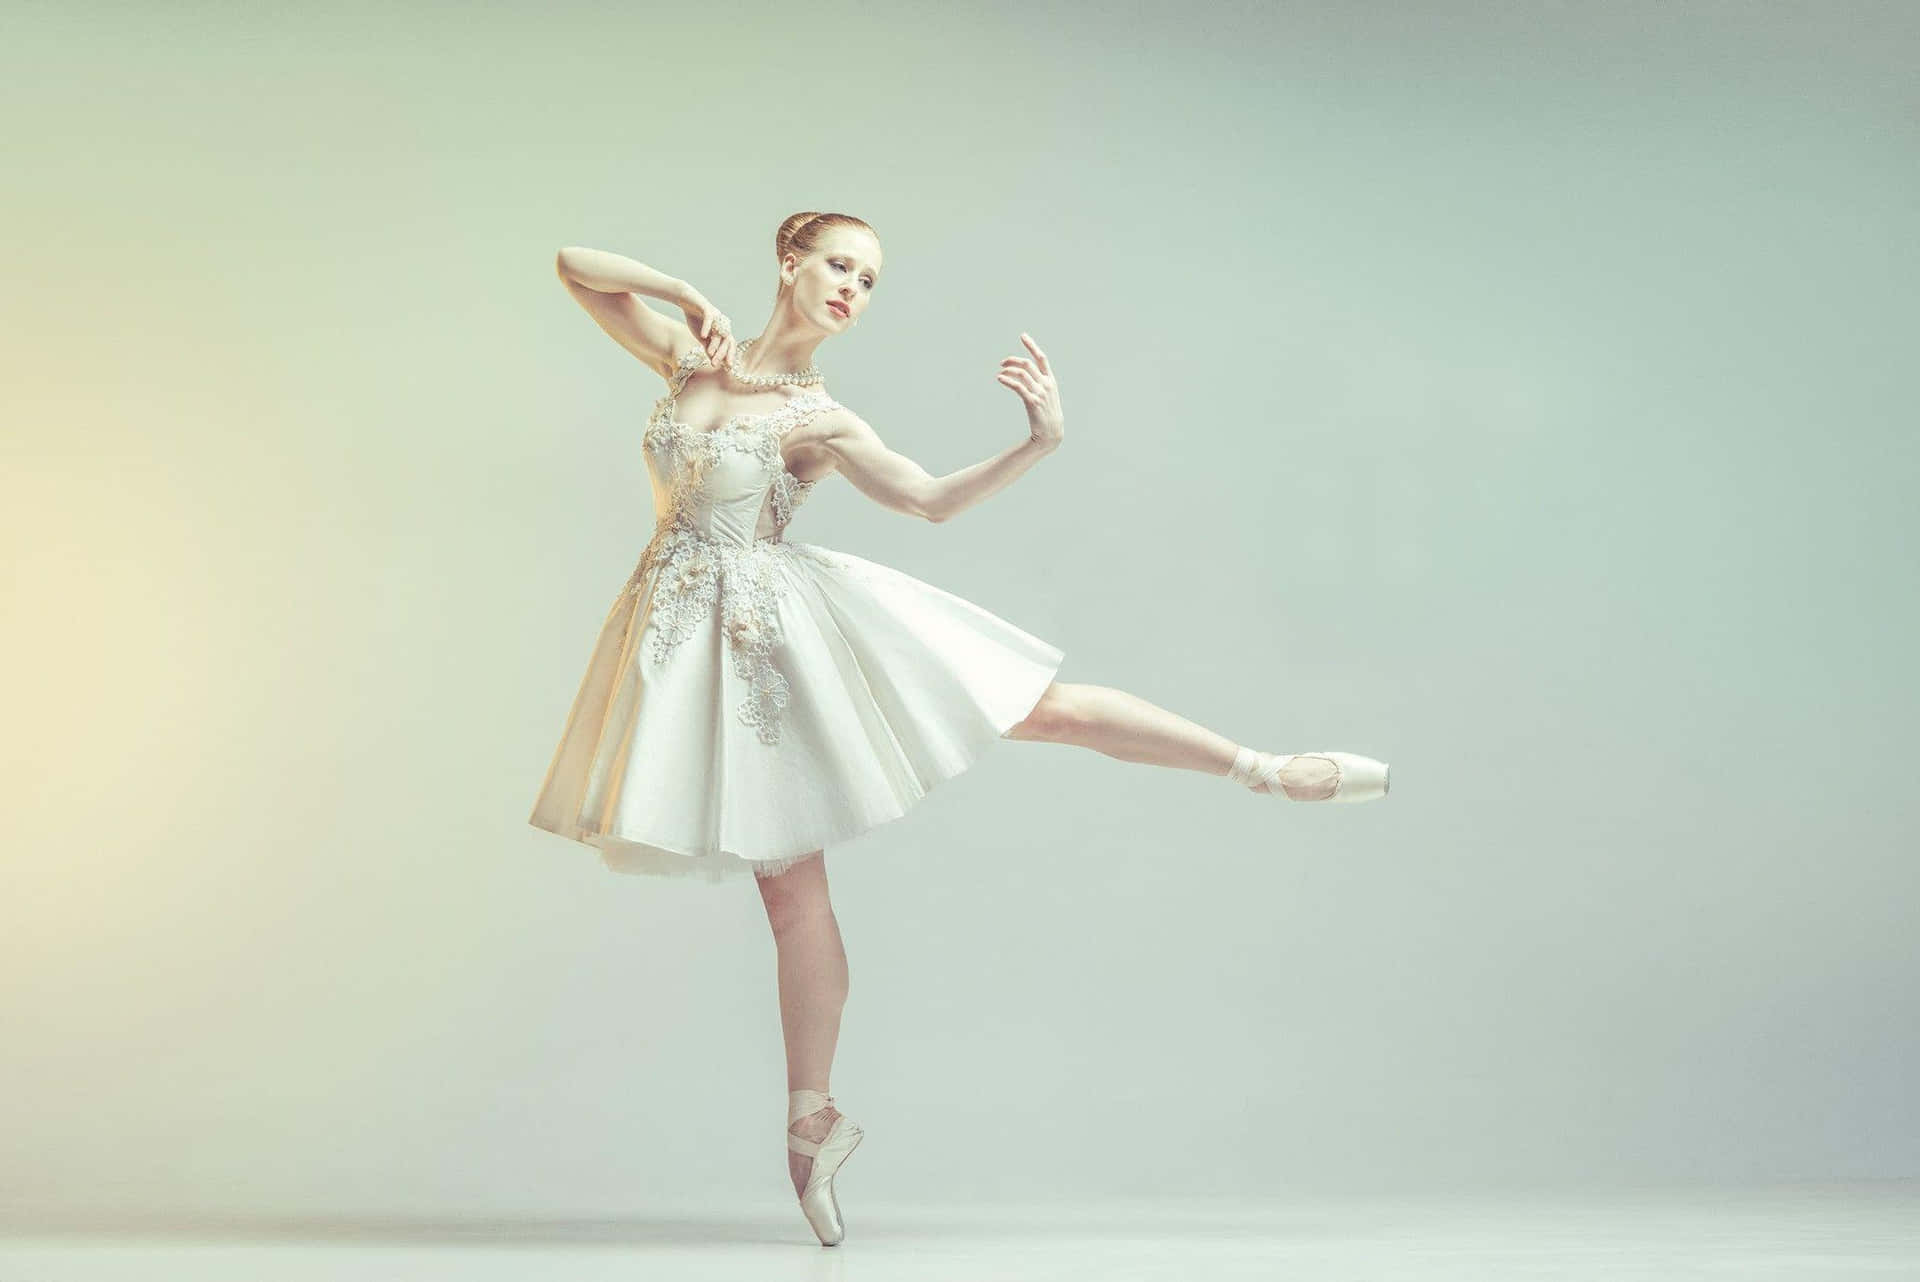 A Young Ballerina In A White Dress Is Posing